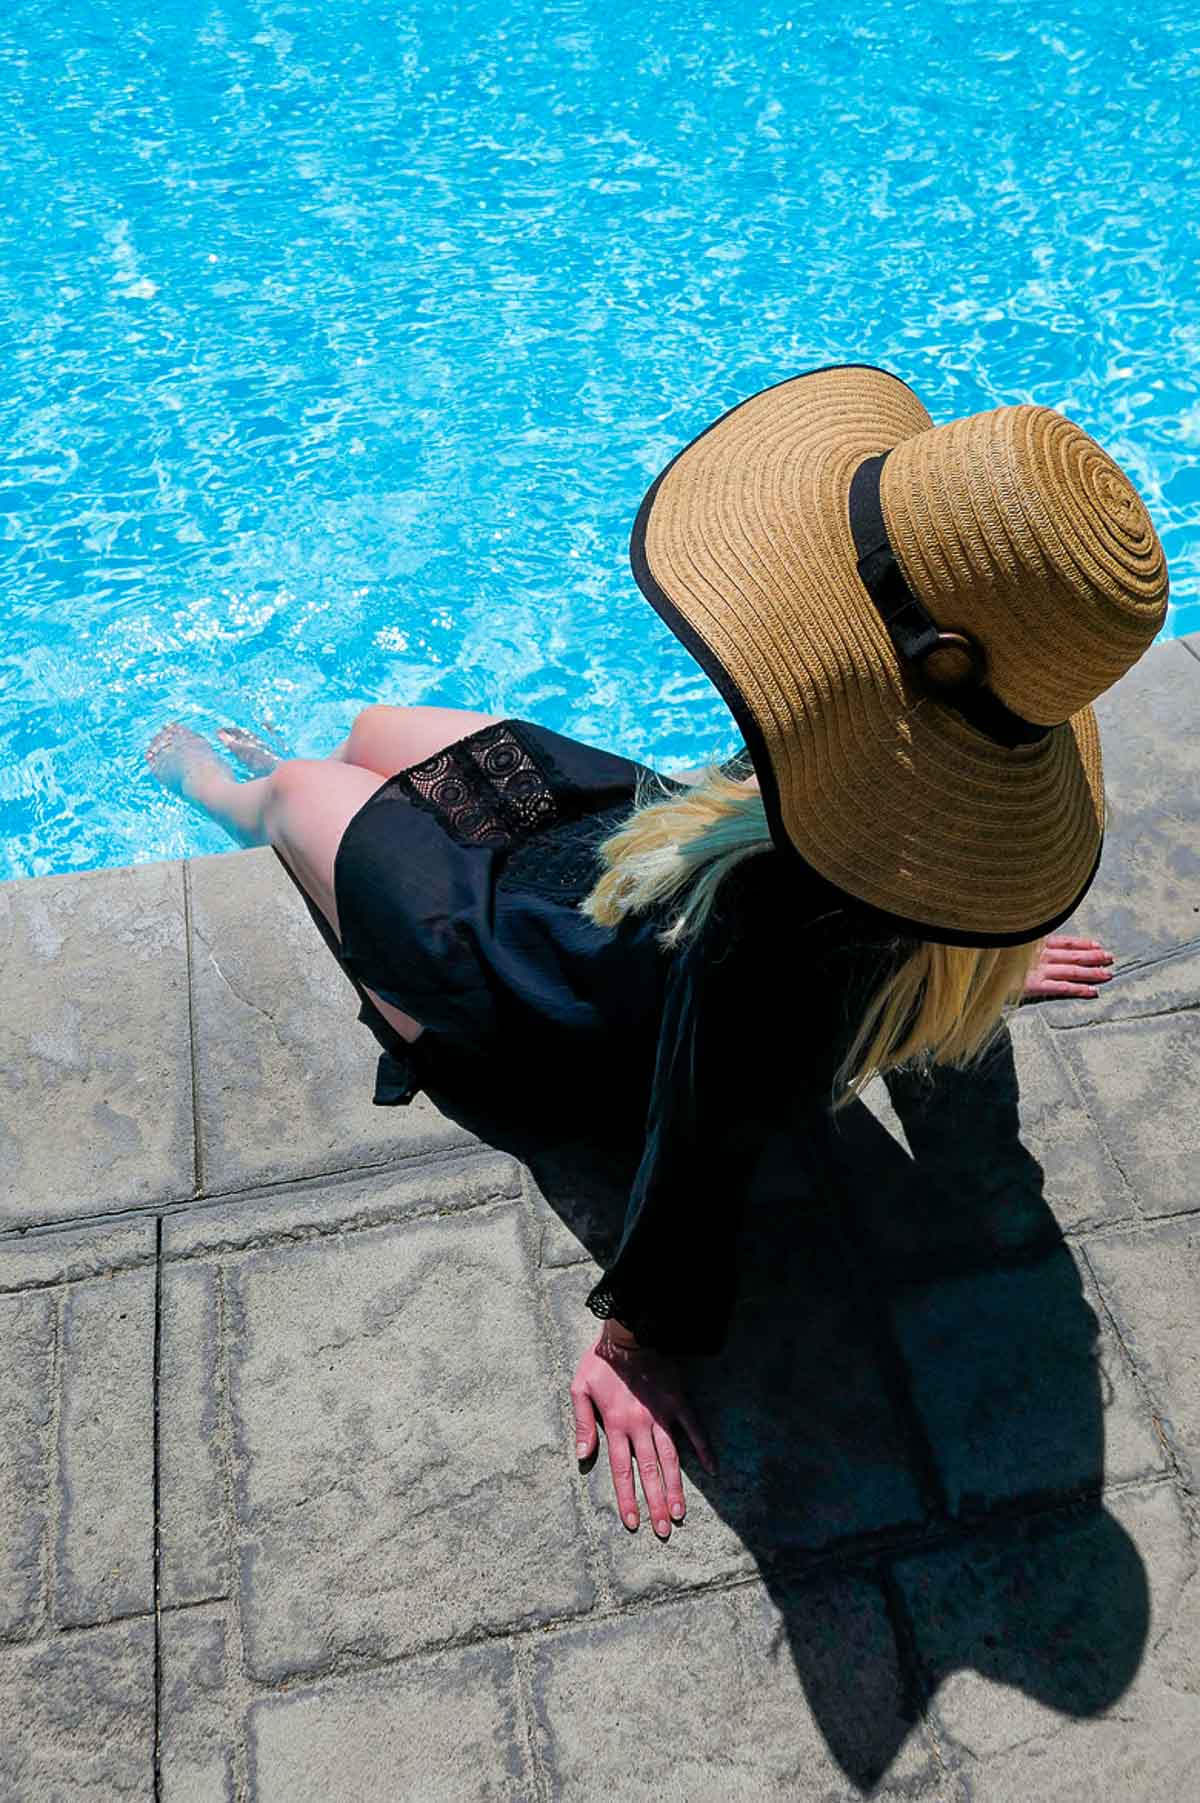 Summer Beauty - Woman Sitting By Pool